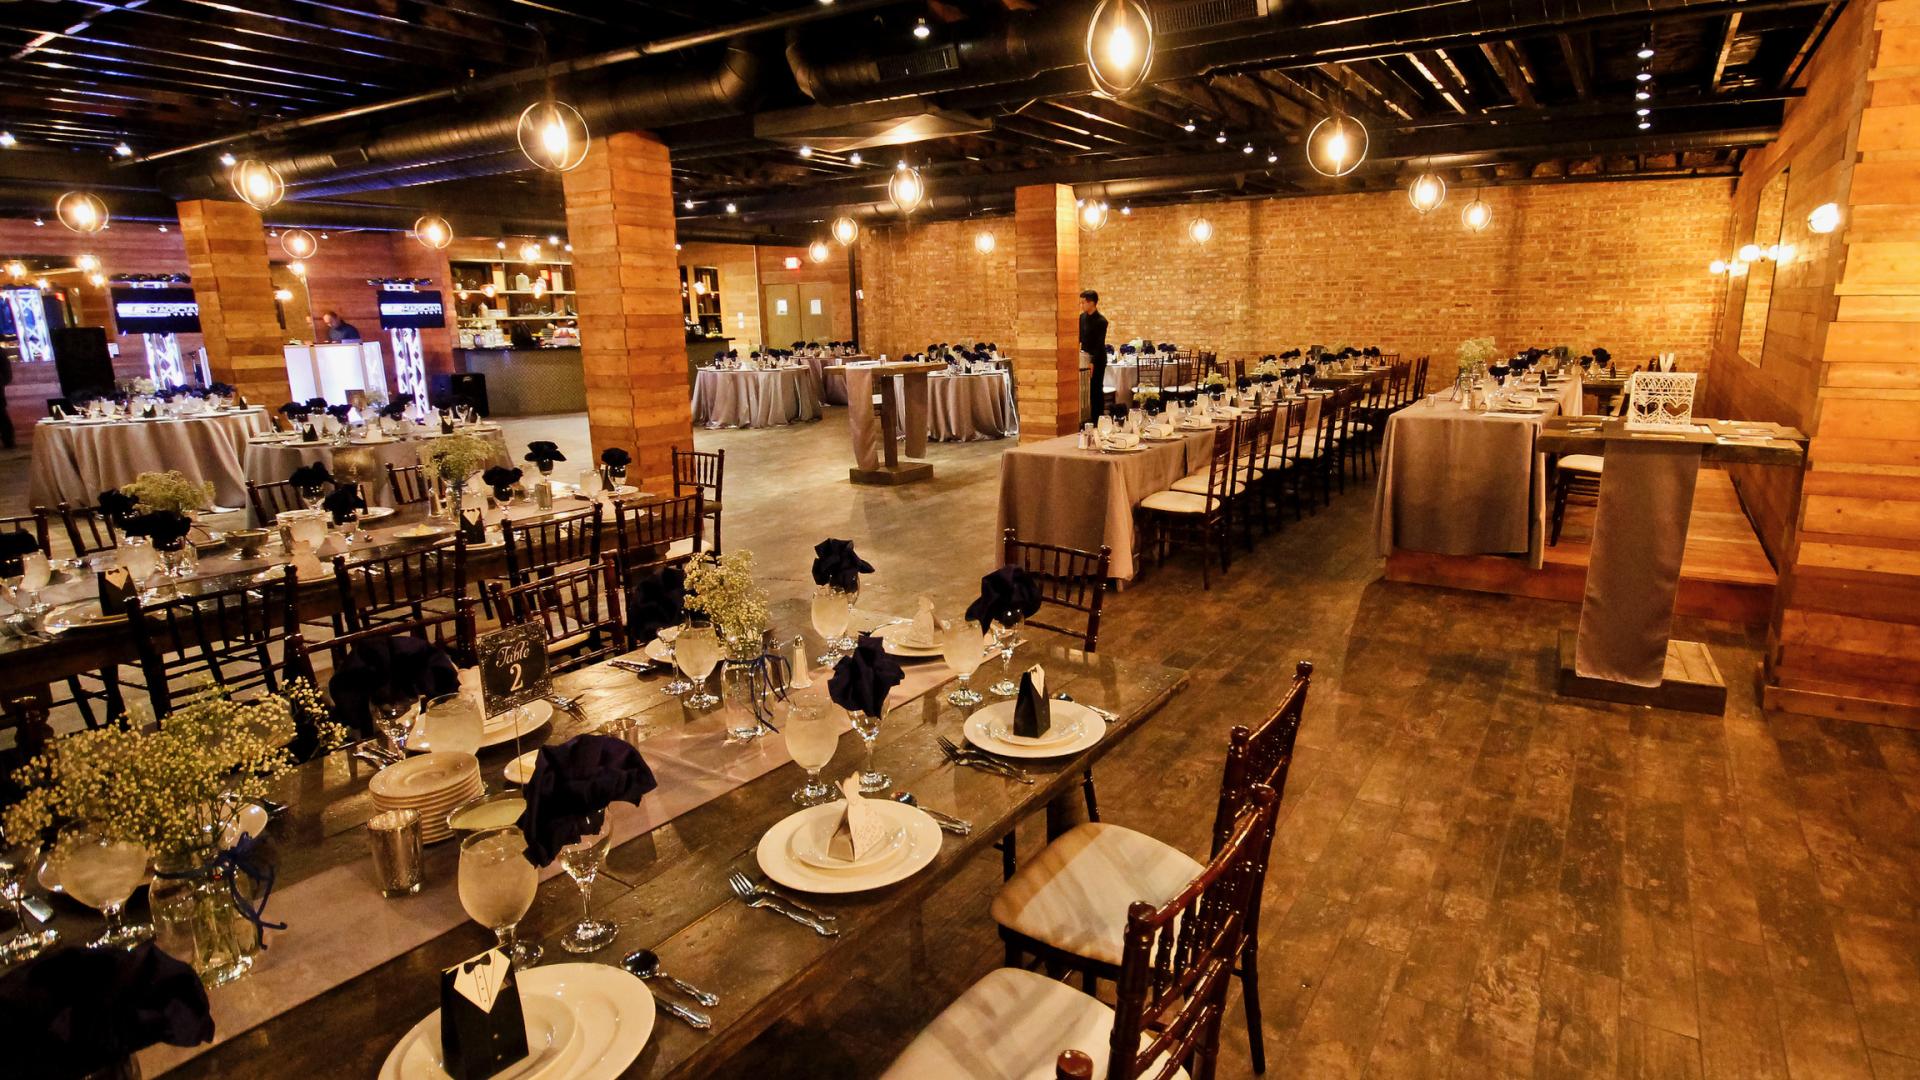 Banquet Halls for Rent in Chicago, IL